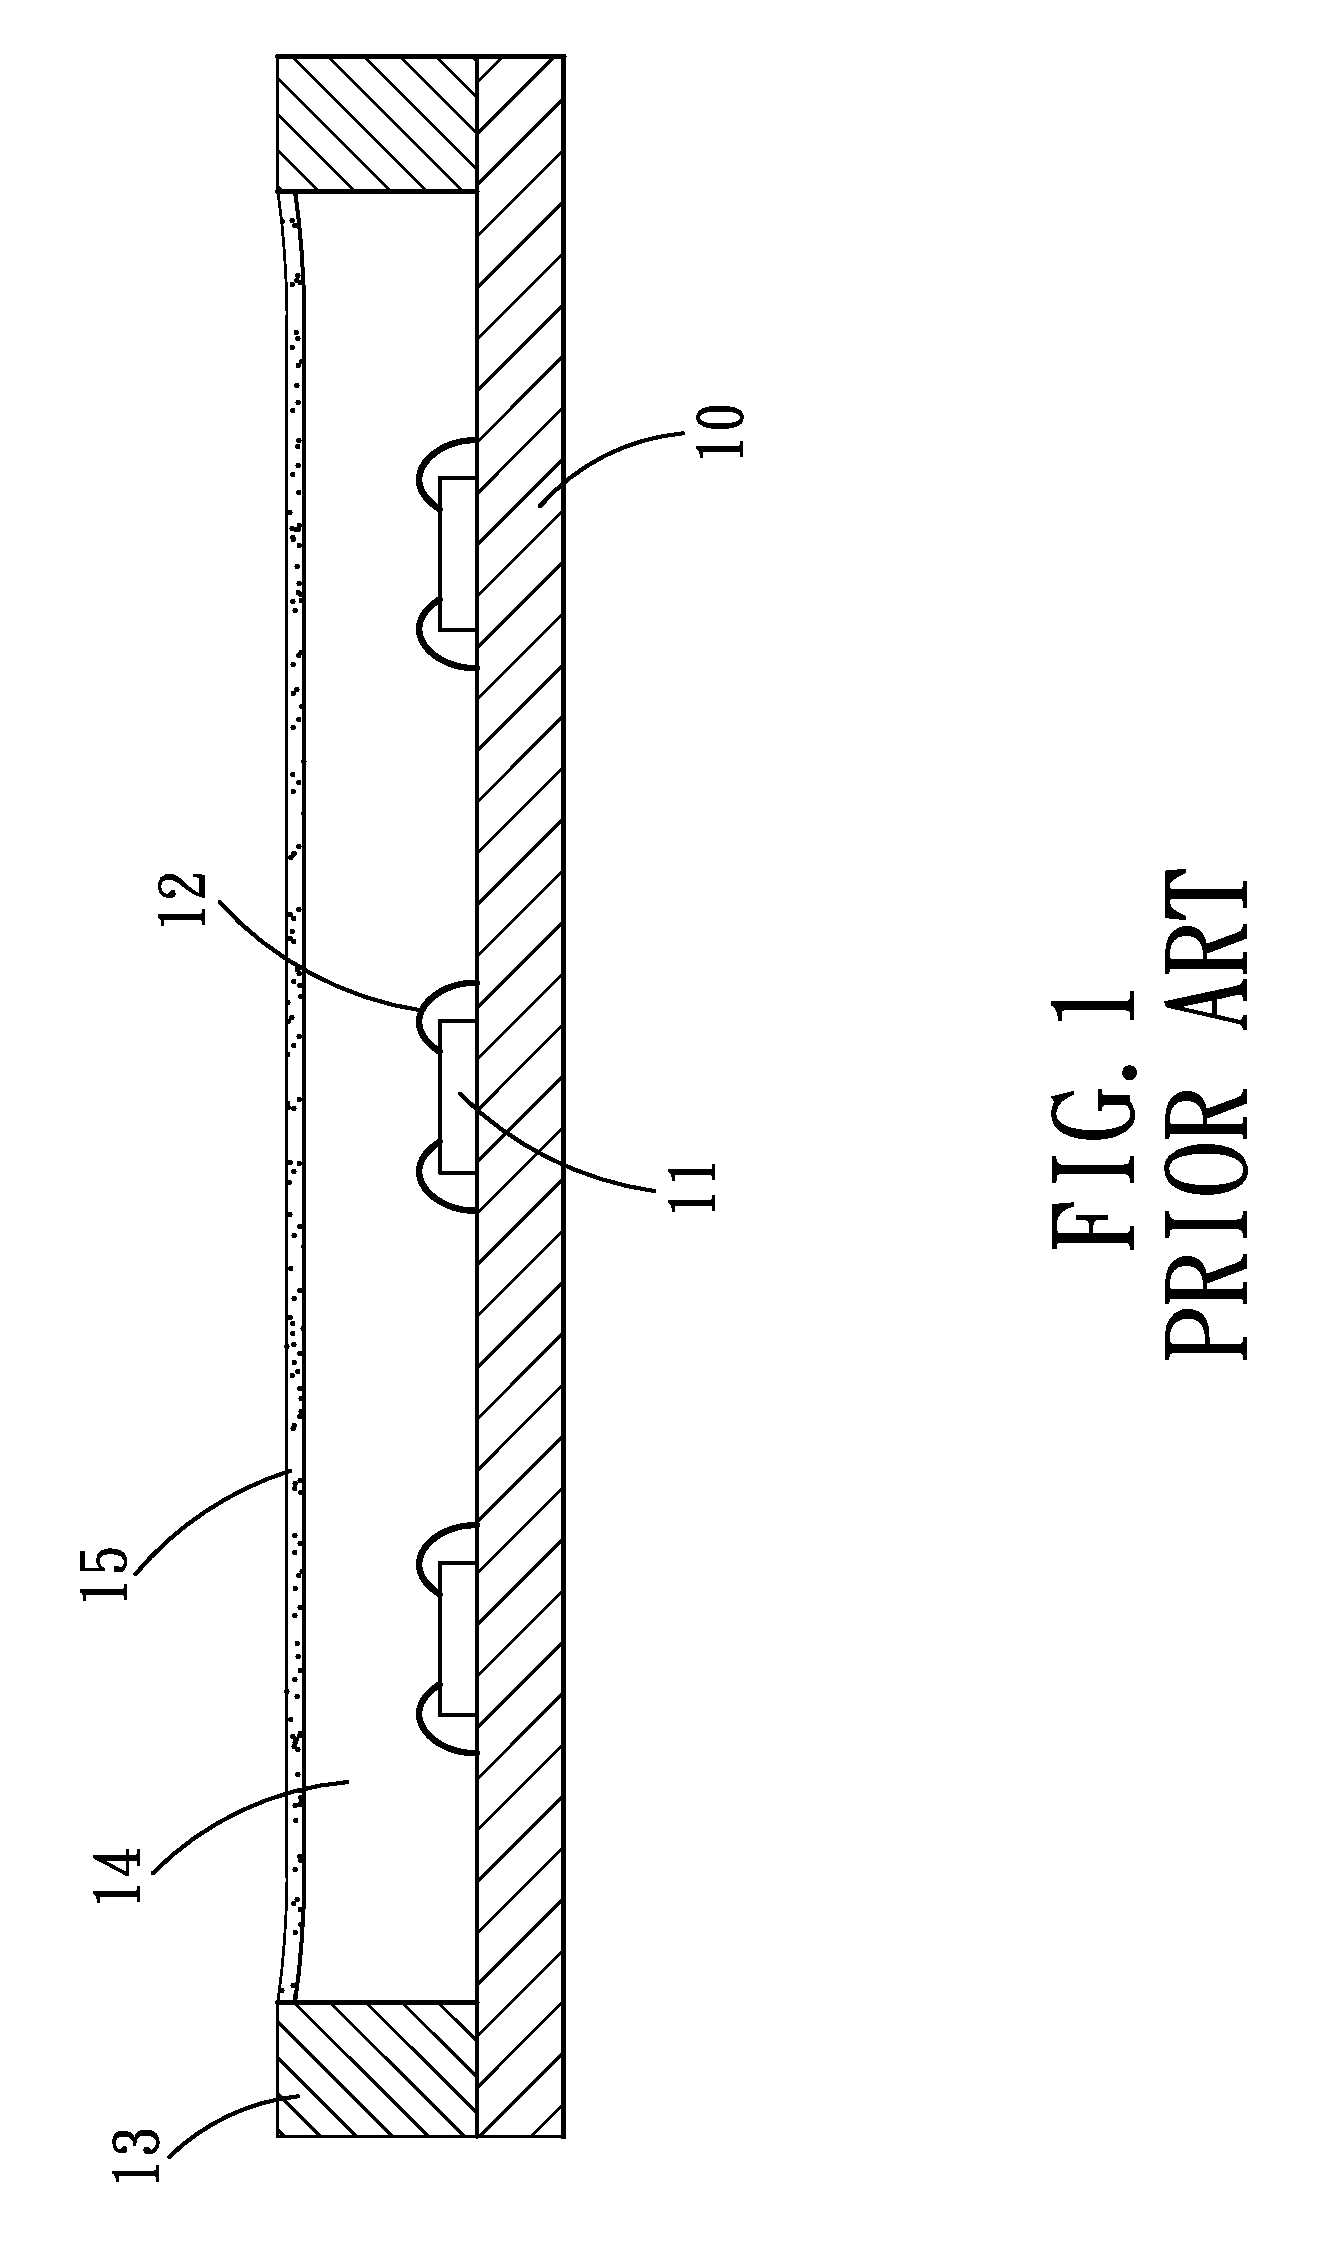 Packaging method for light emitting diode module that includes fabricating frame around substrate